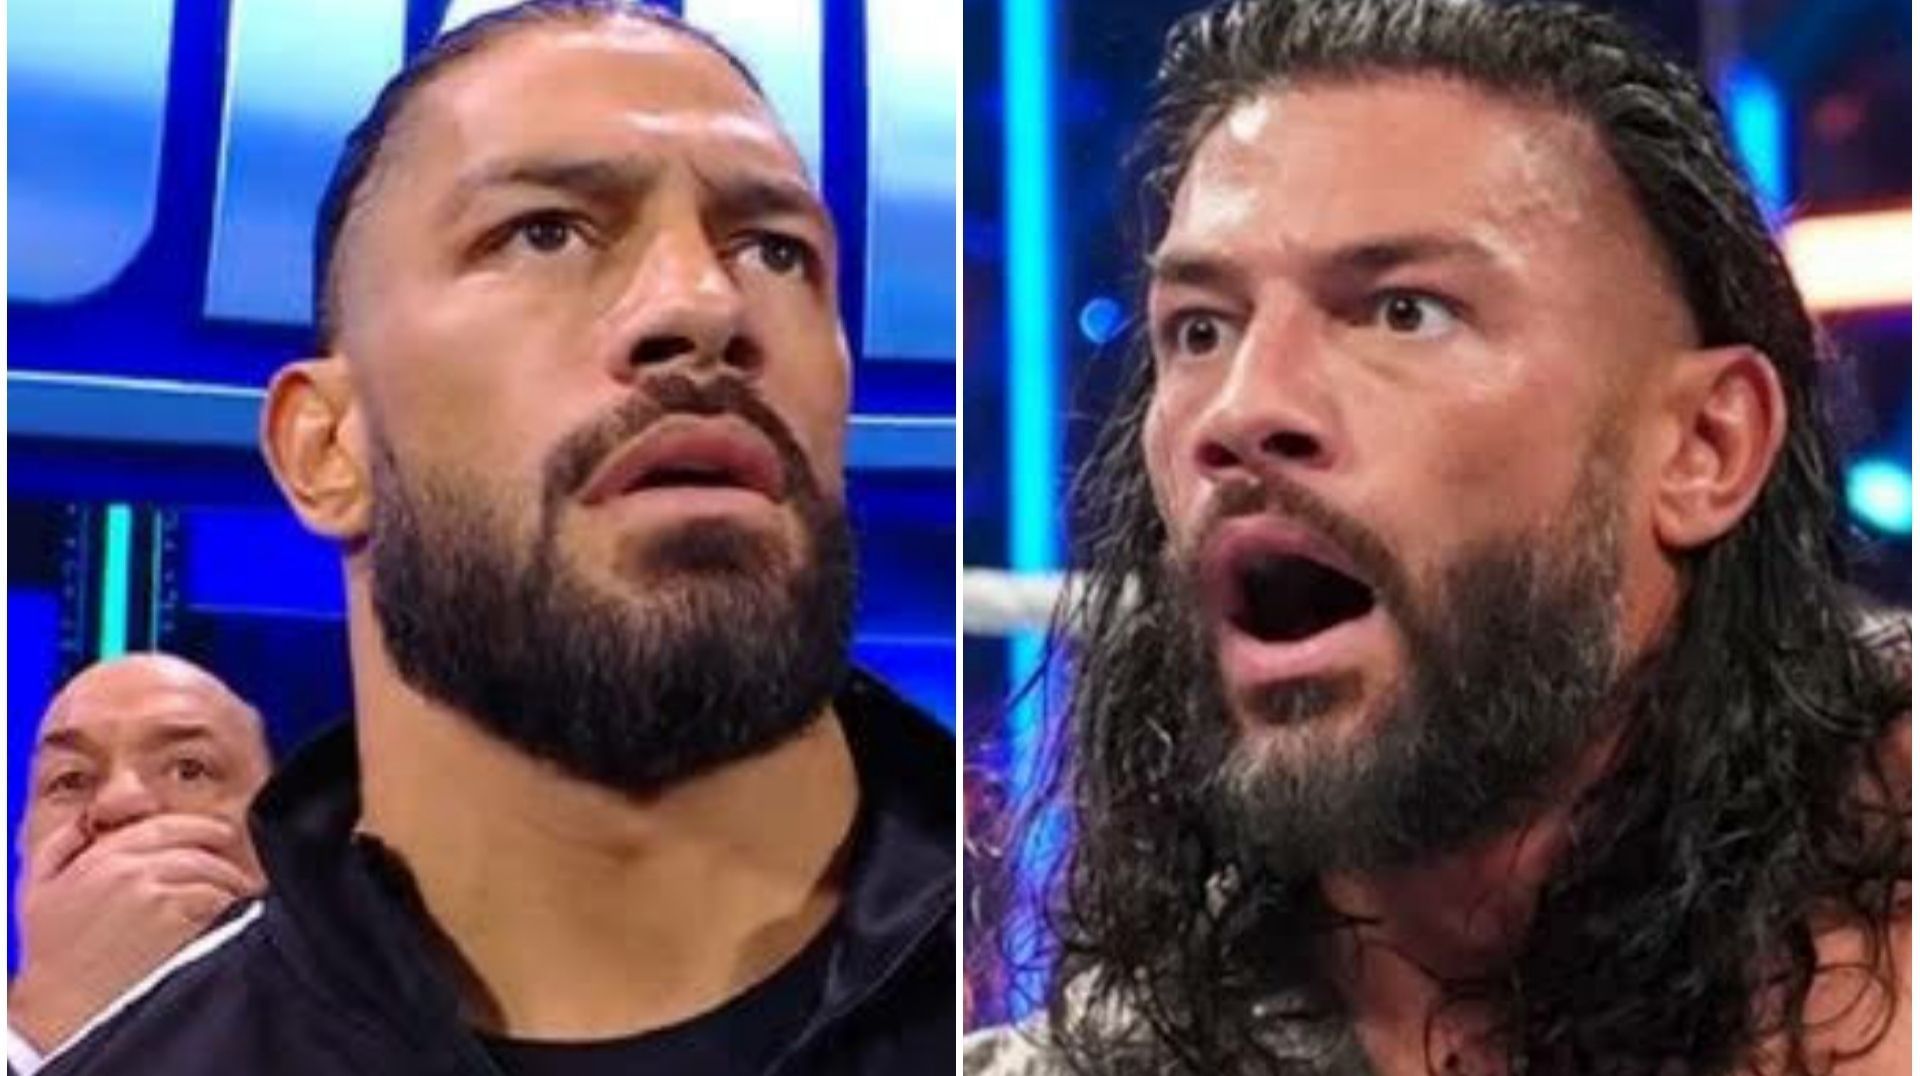 Roman Reings and Solo Sikoa vs. The Usos is set for MITB.